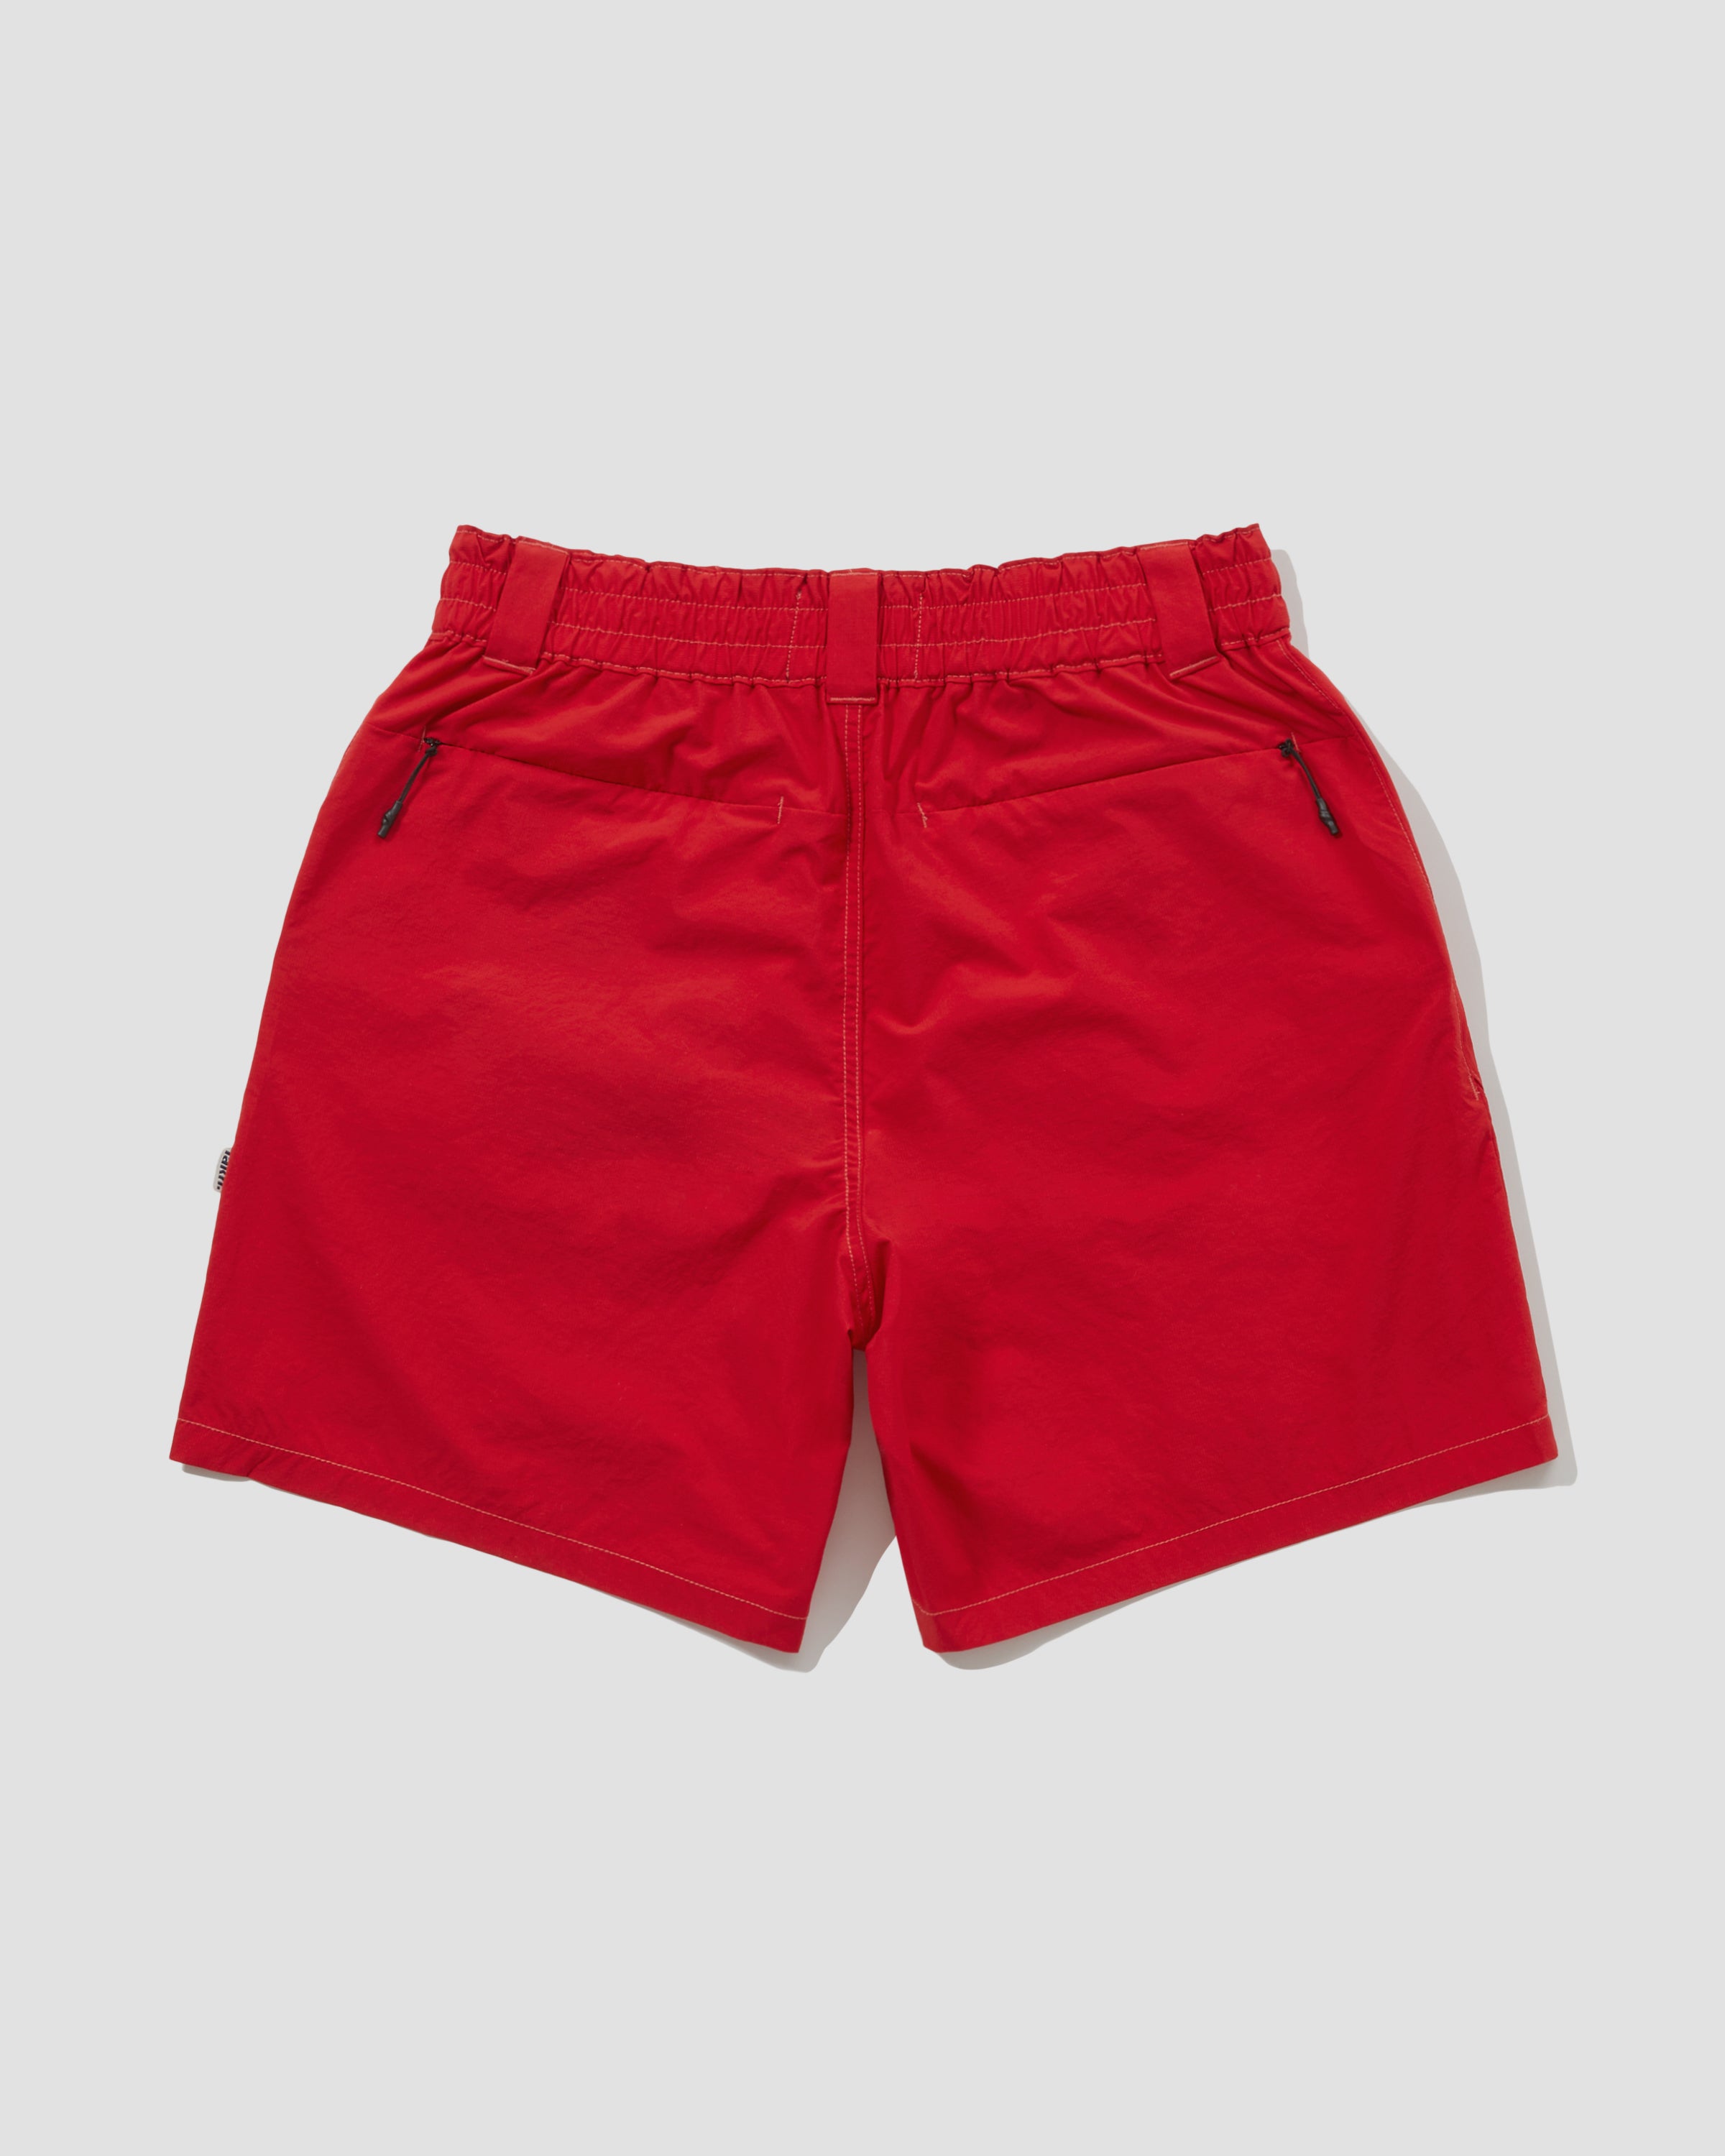 Gadget Shorts - Red